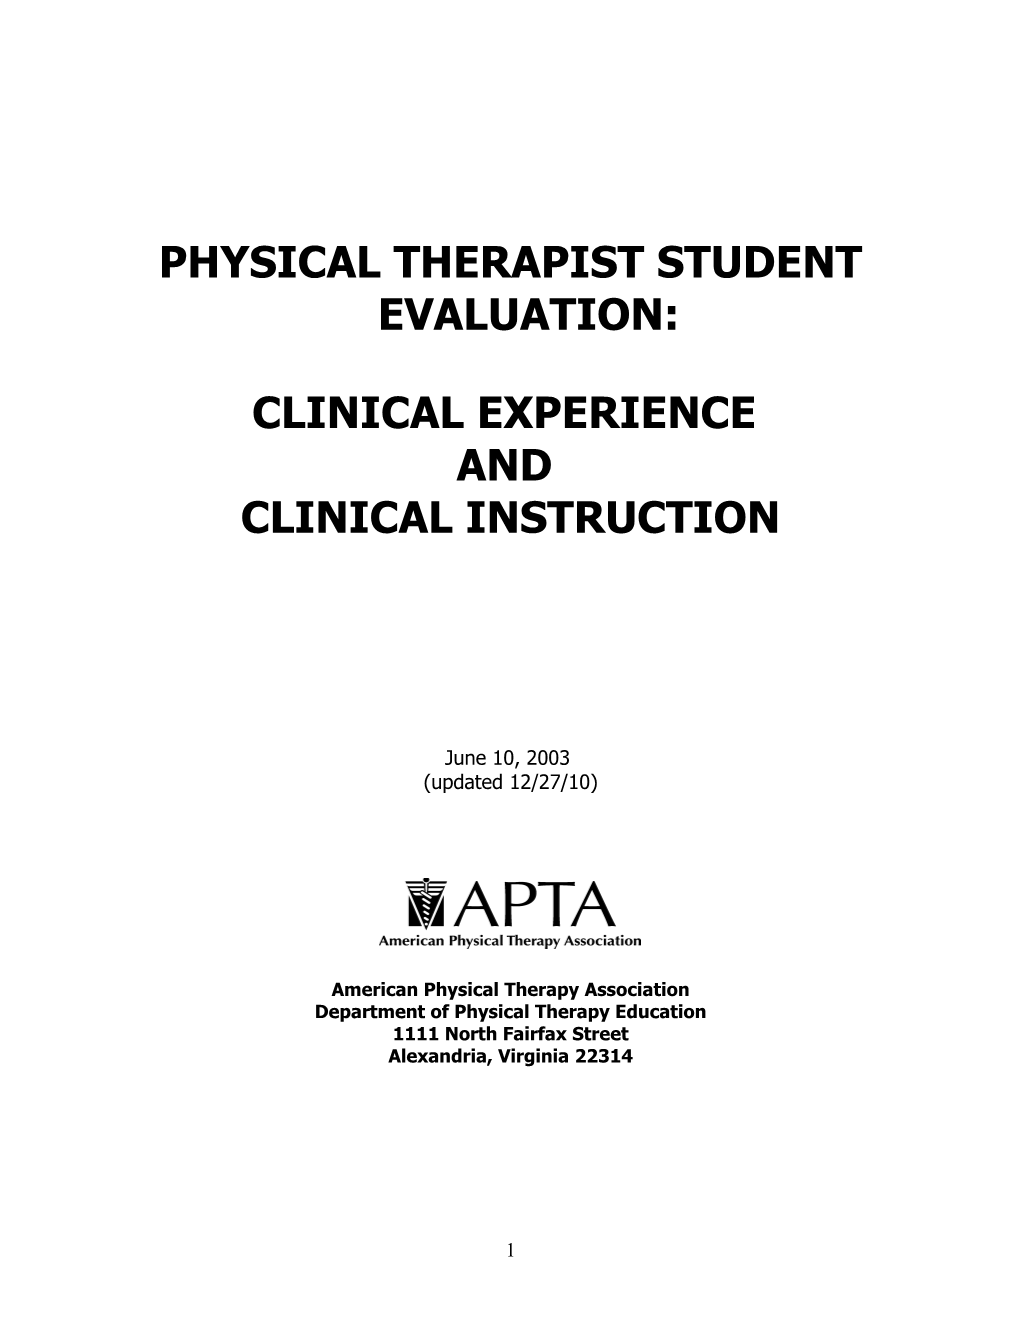 Physical Therapist Student Evaluation